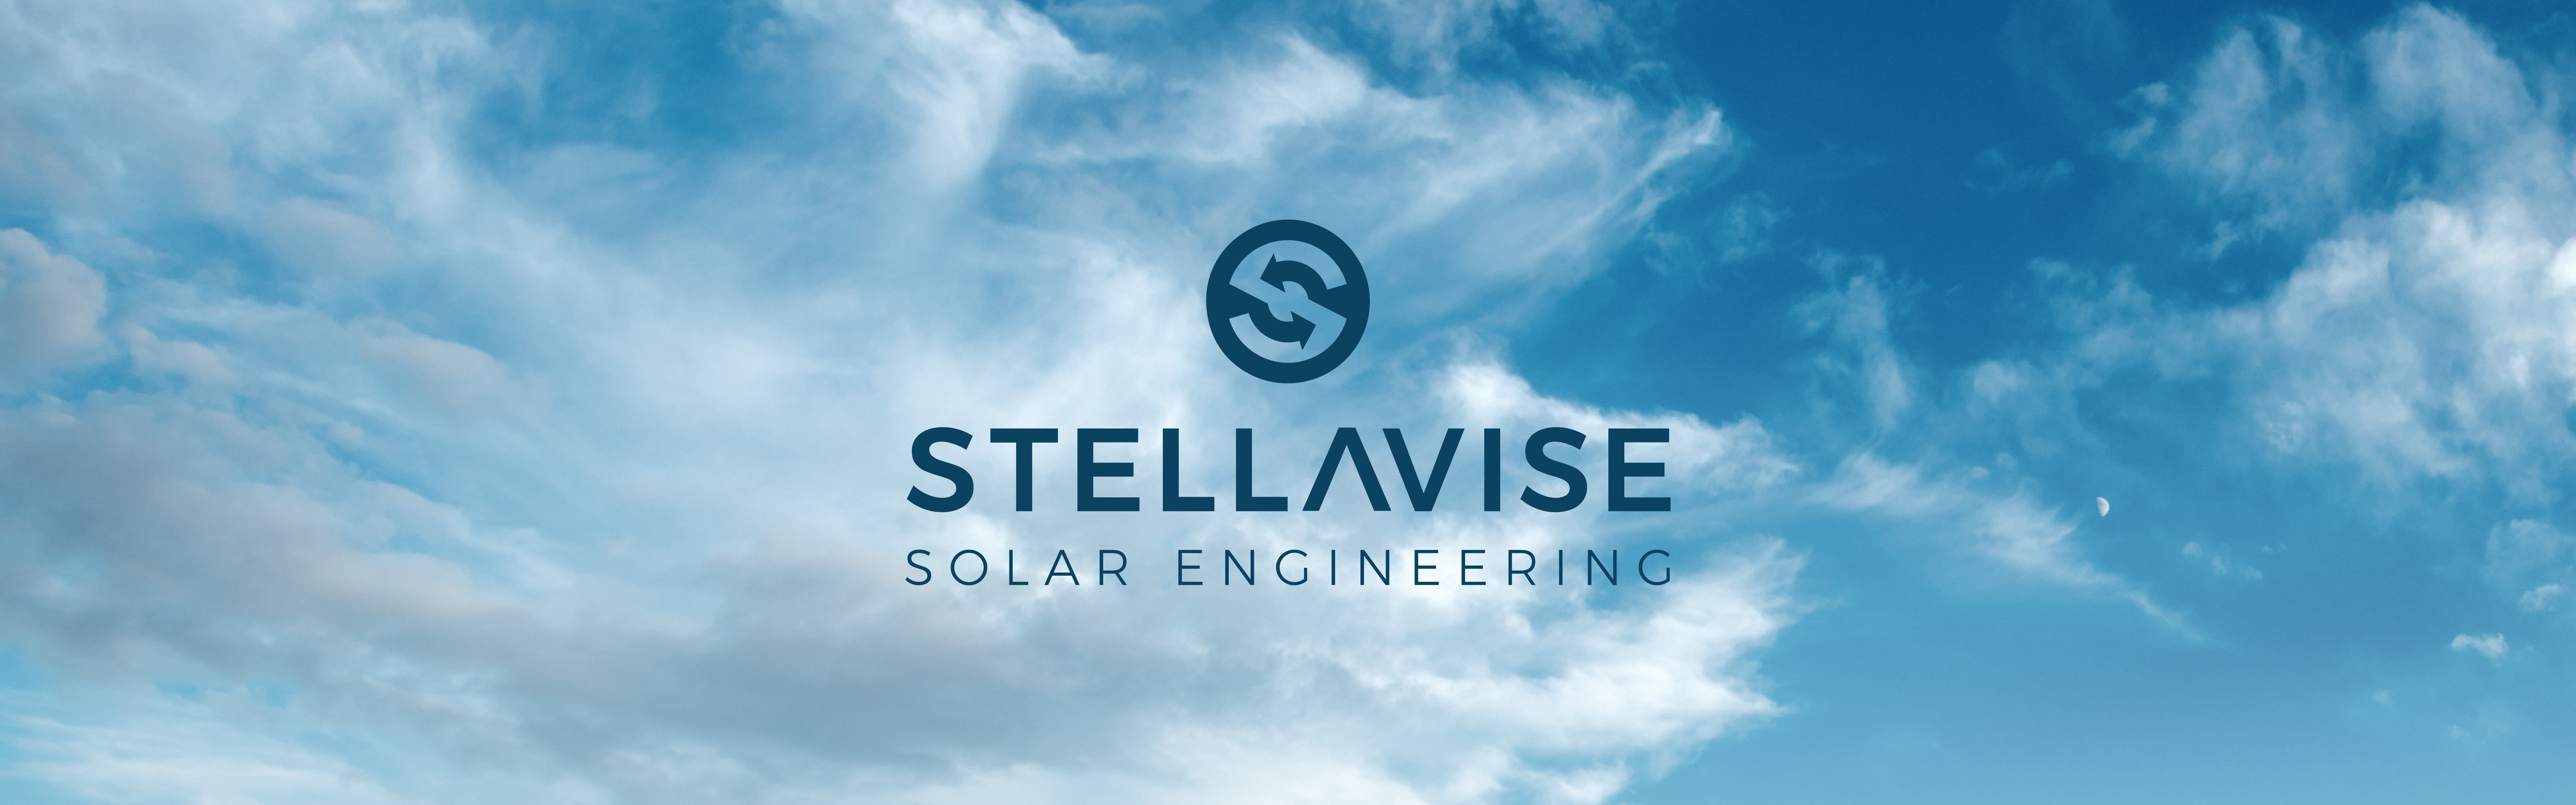 A wide-angle view of a blue sky with clouds featuring the logo and text "Stellavise Solar Engineering.